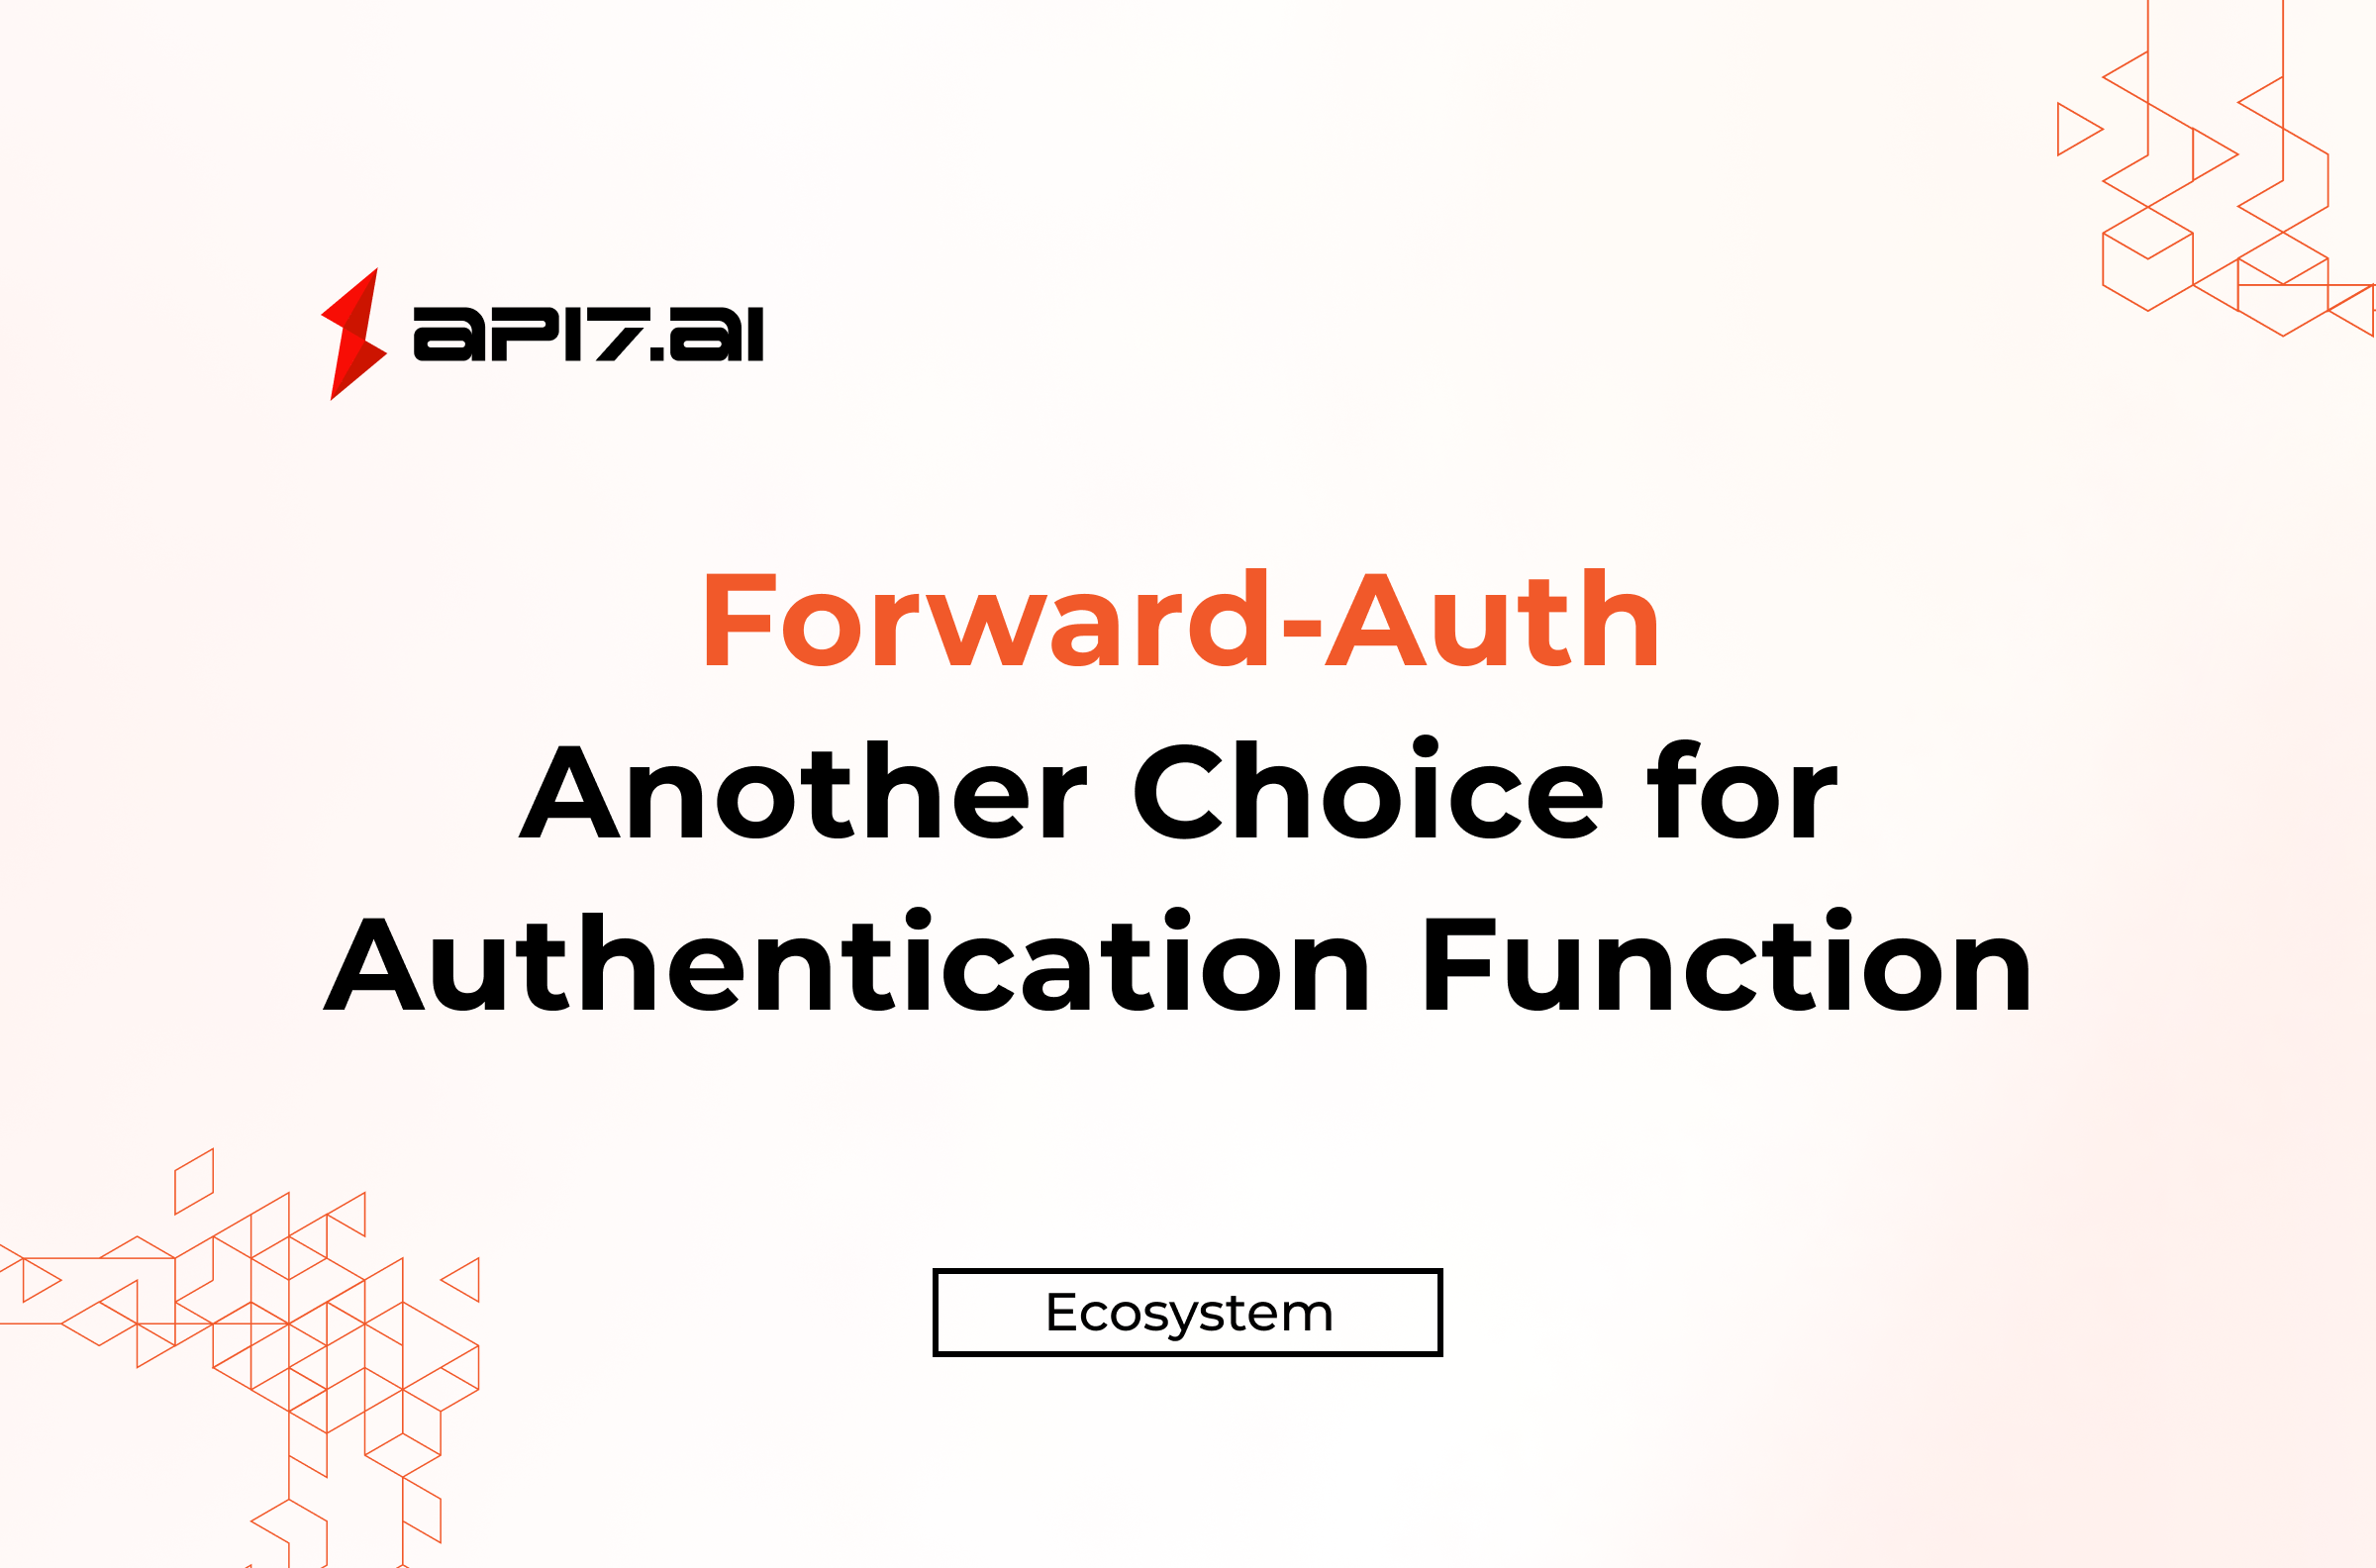 Forward-Auth, Another Choice for Authentication Function